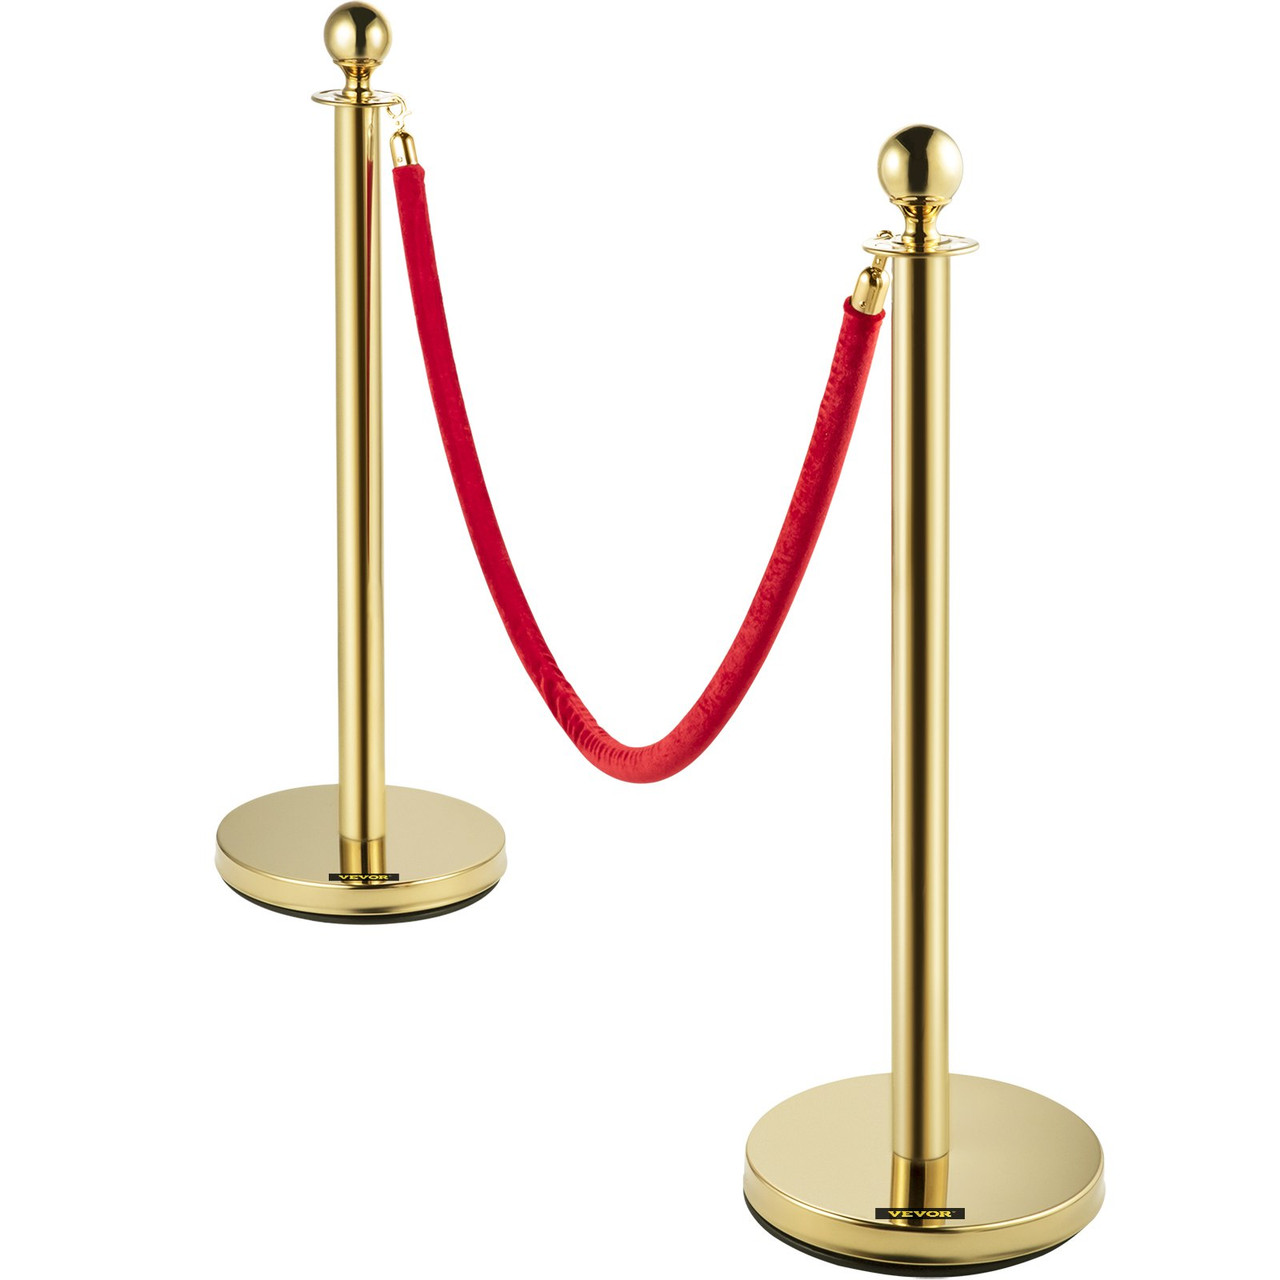 VEVOR Velvet Ropes and Posts, 5 ft/1.5 m Red Rope, Stainless Steel Gold Stanchion with Ball Top, Red Crowd Control Barrier Used for Theaters, Party, Wedding, Exhibition, Ticket Offices 2 Pack Sets